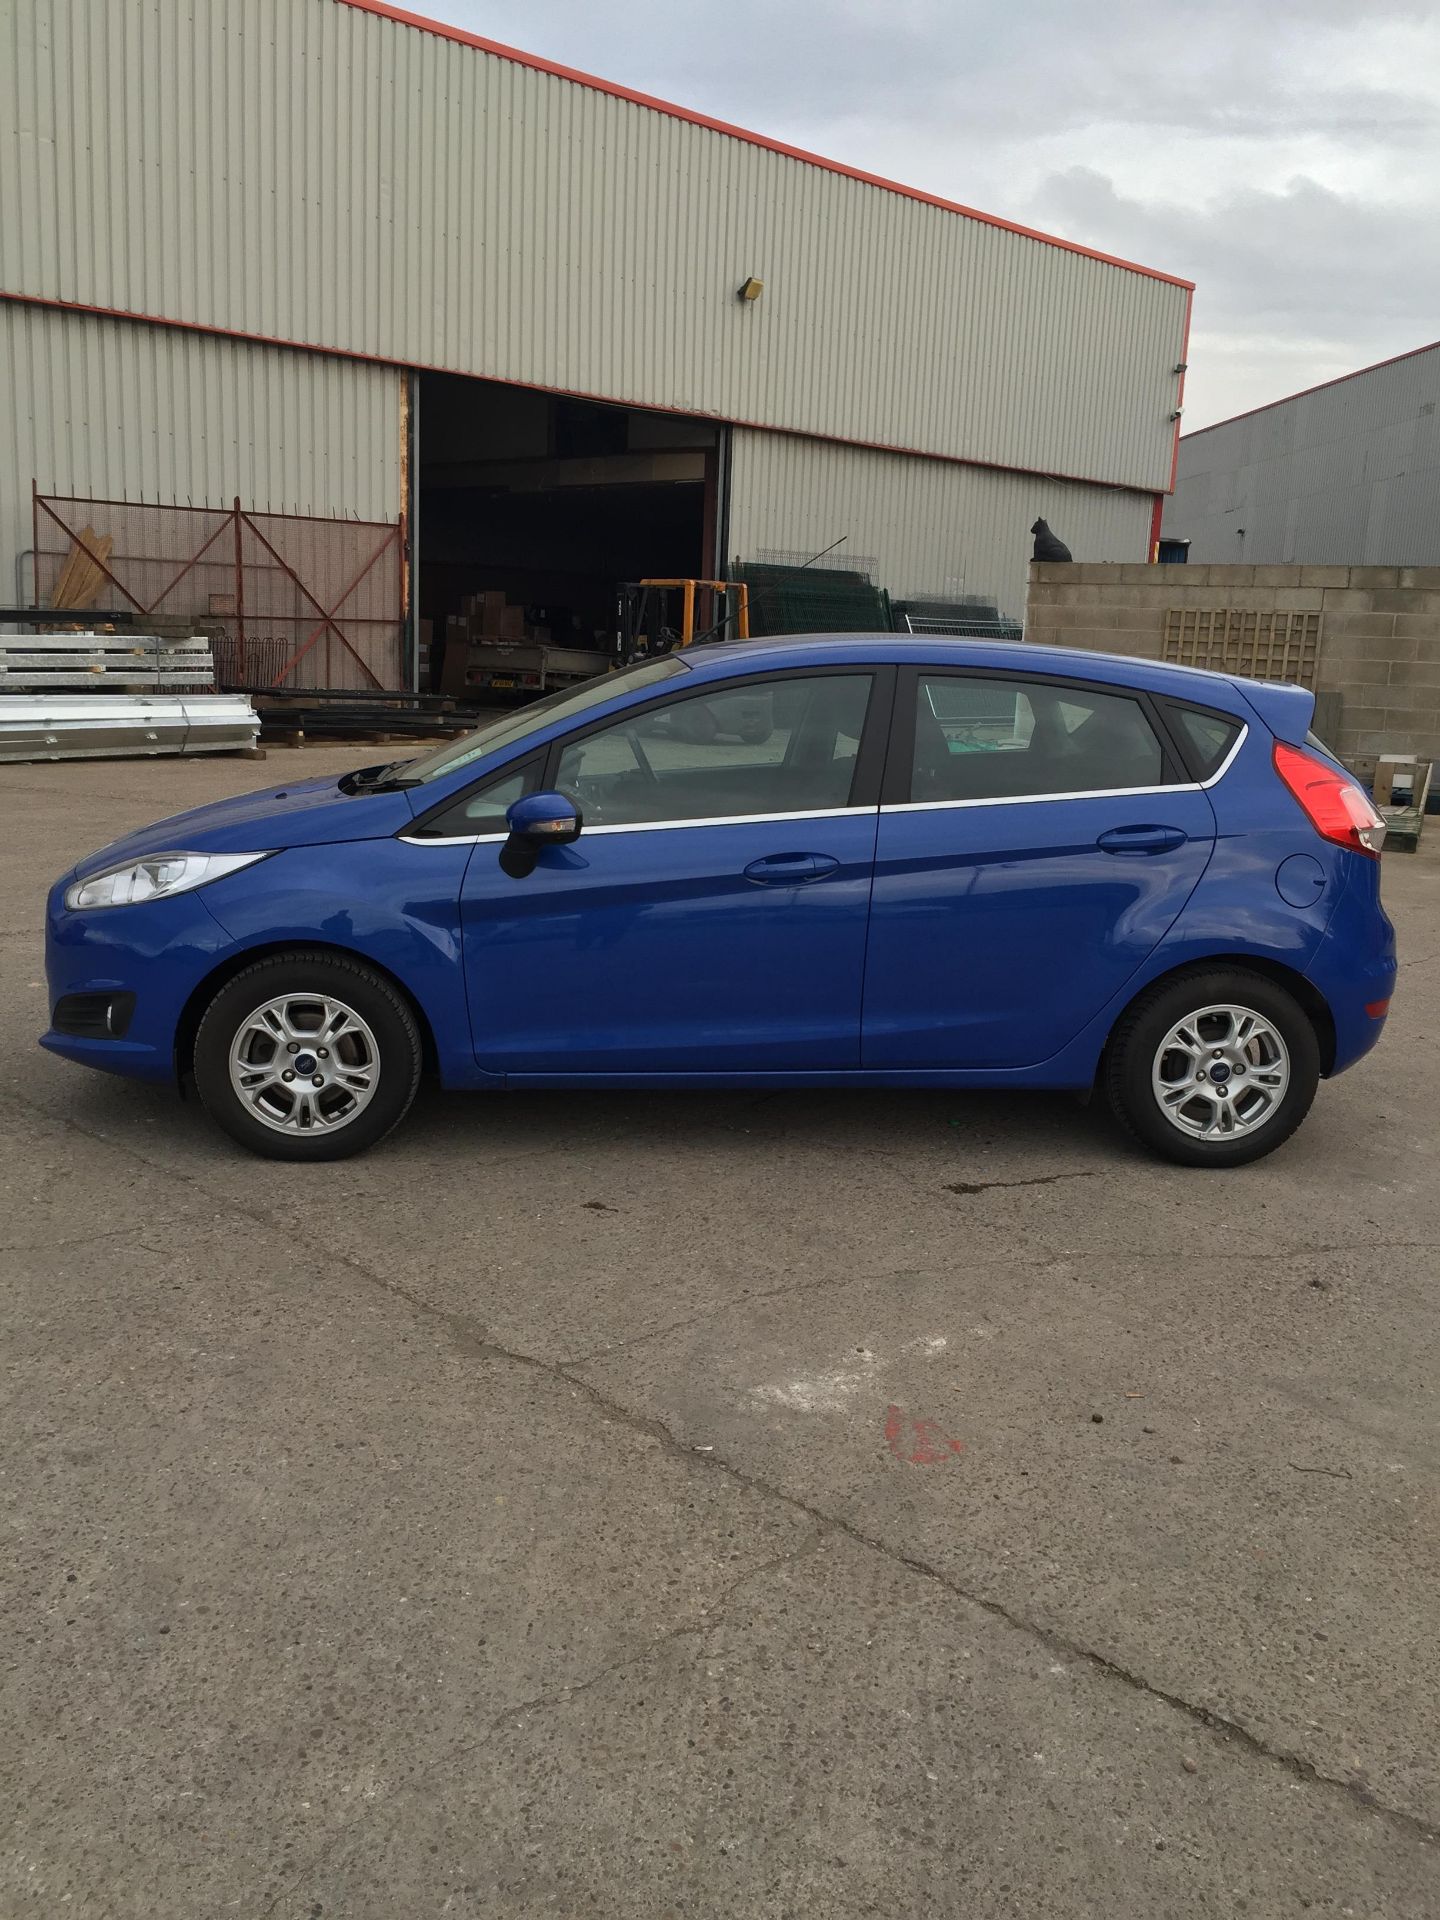 13 Plate FORD FIESTA ZETEC Econetic TDCI - YP13 NRY - Blue - 5 door hatchback - Tax expired 1st Feb - Image 4 of 17